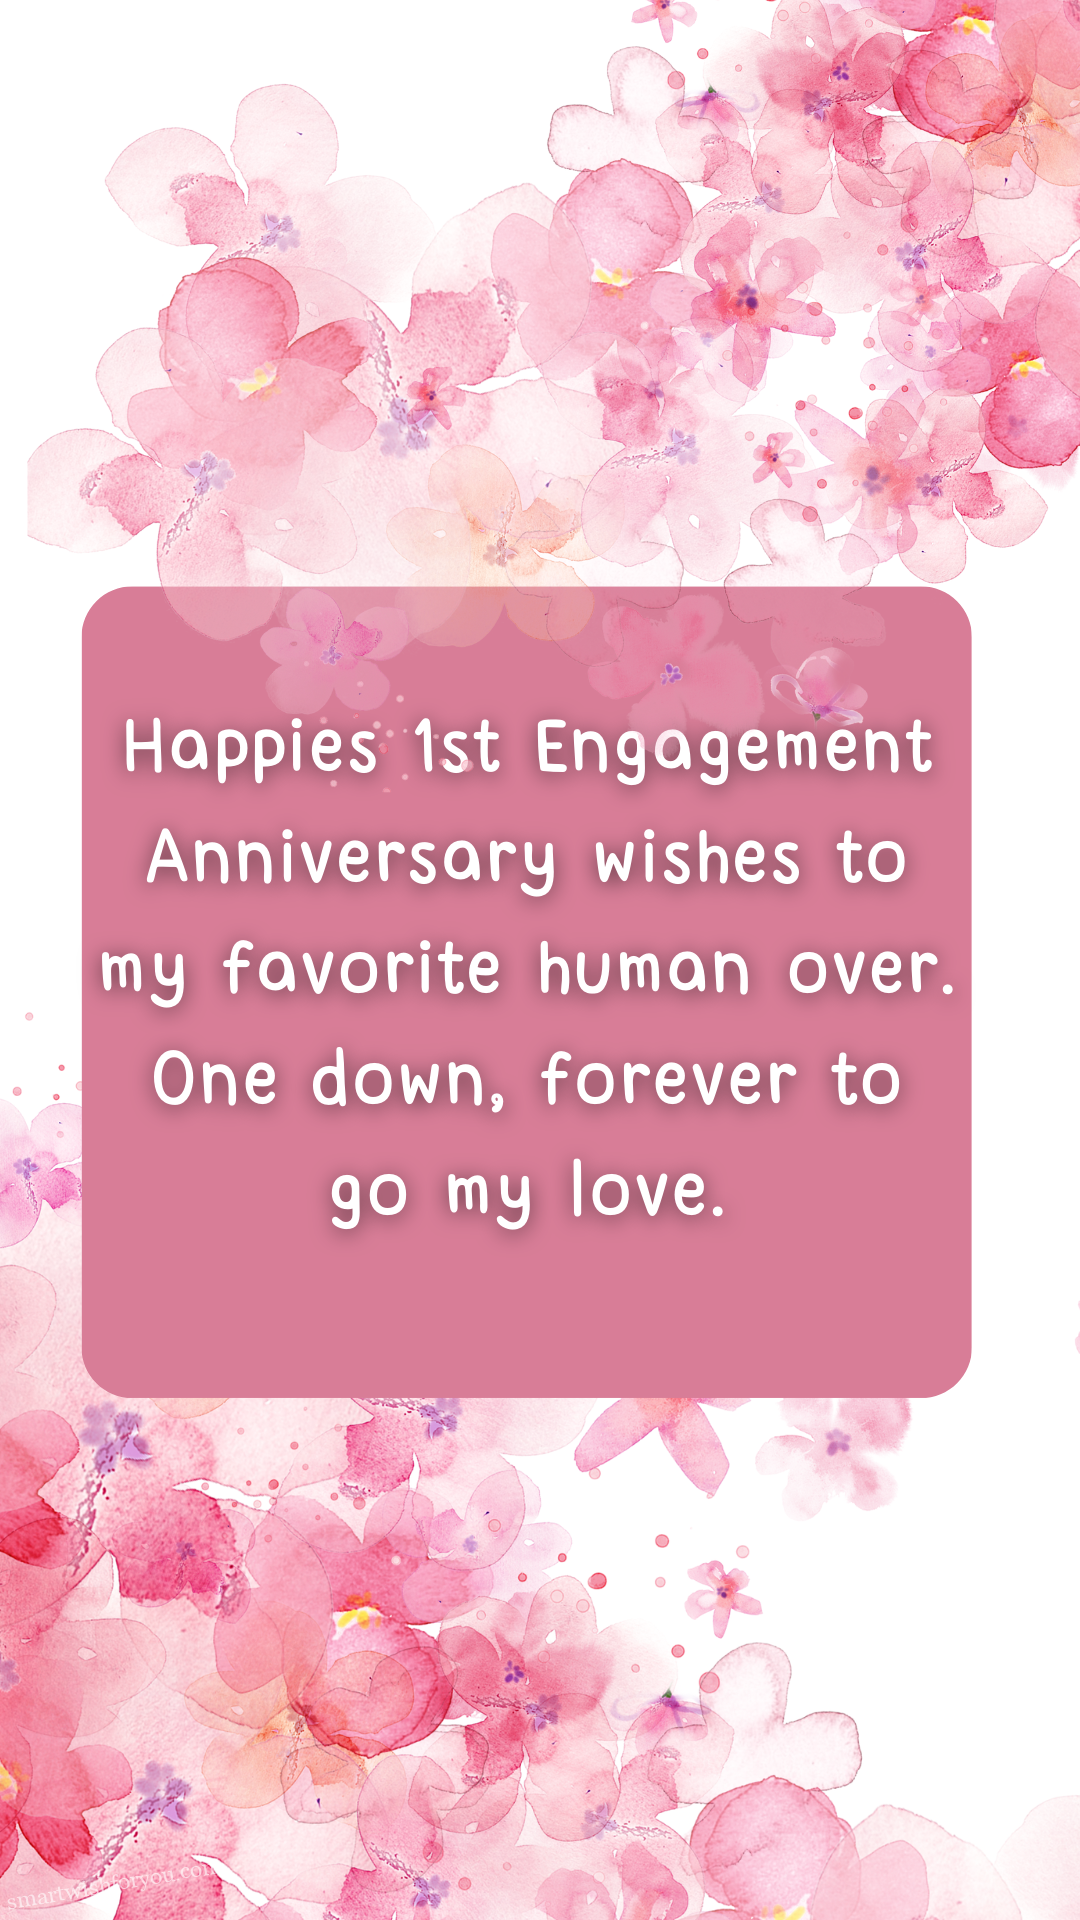 100 Engagement Quotes About True Love to Share - Parade: Entertainment,  Recipes, Health, Life, Holidays